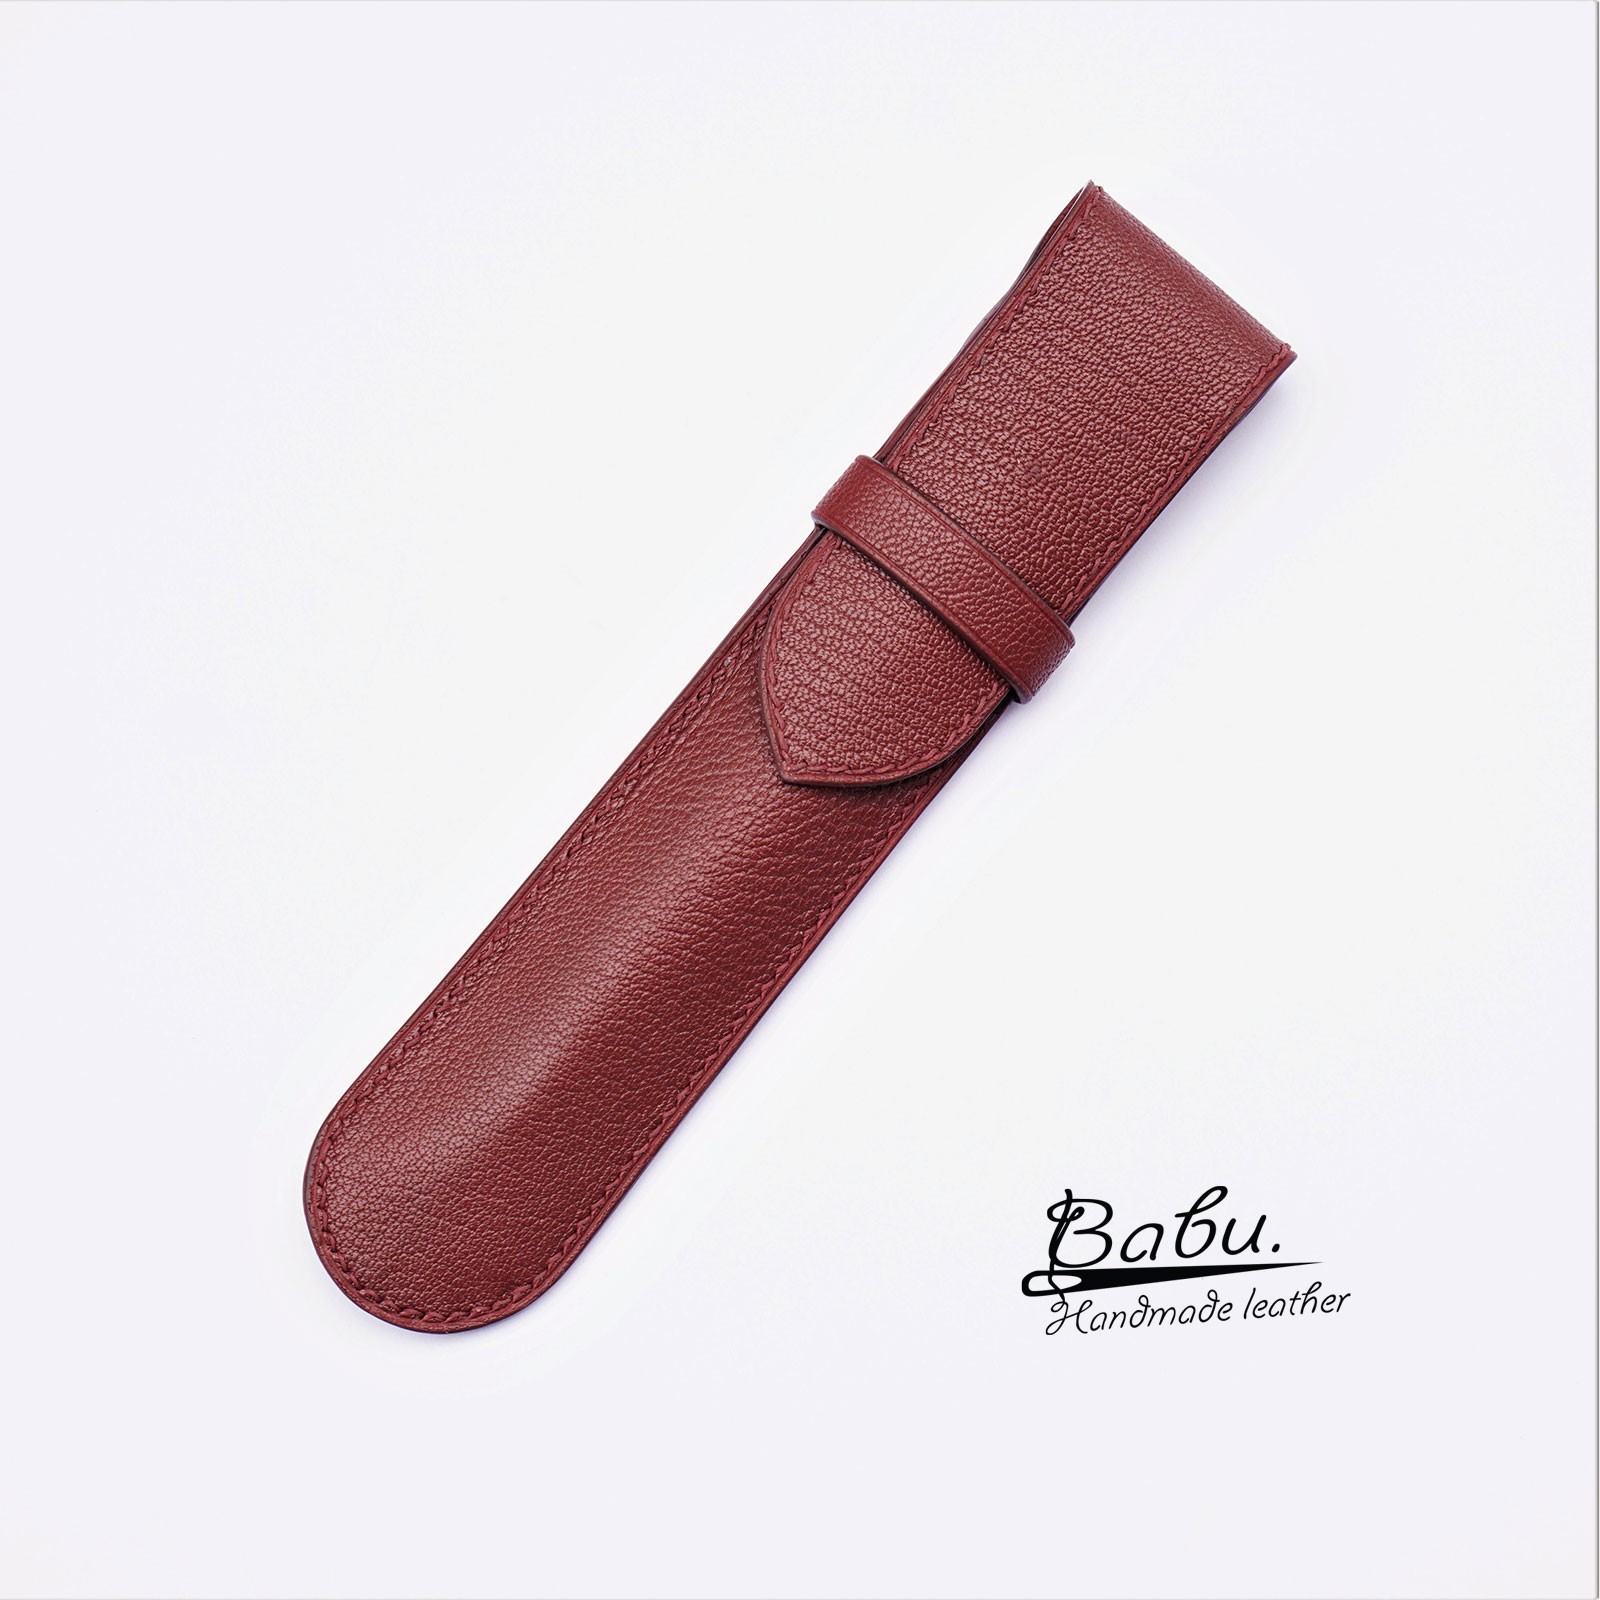 Custom leather pen cases and sleeves